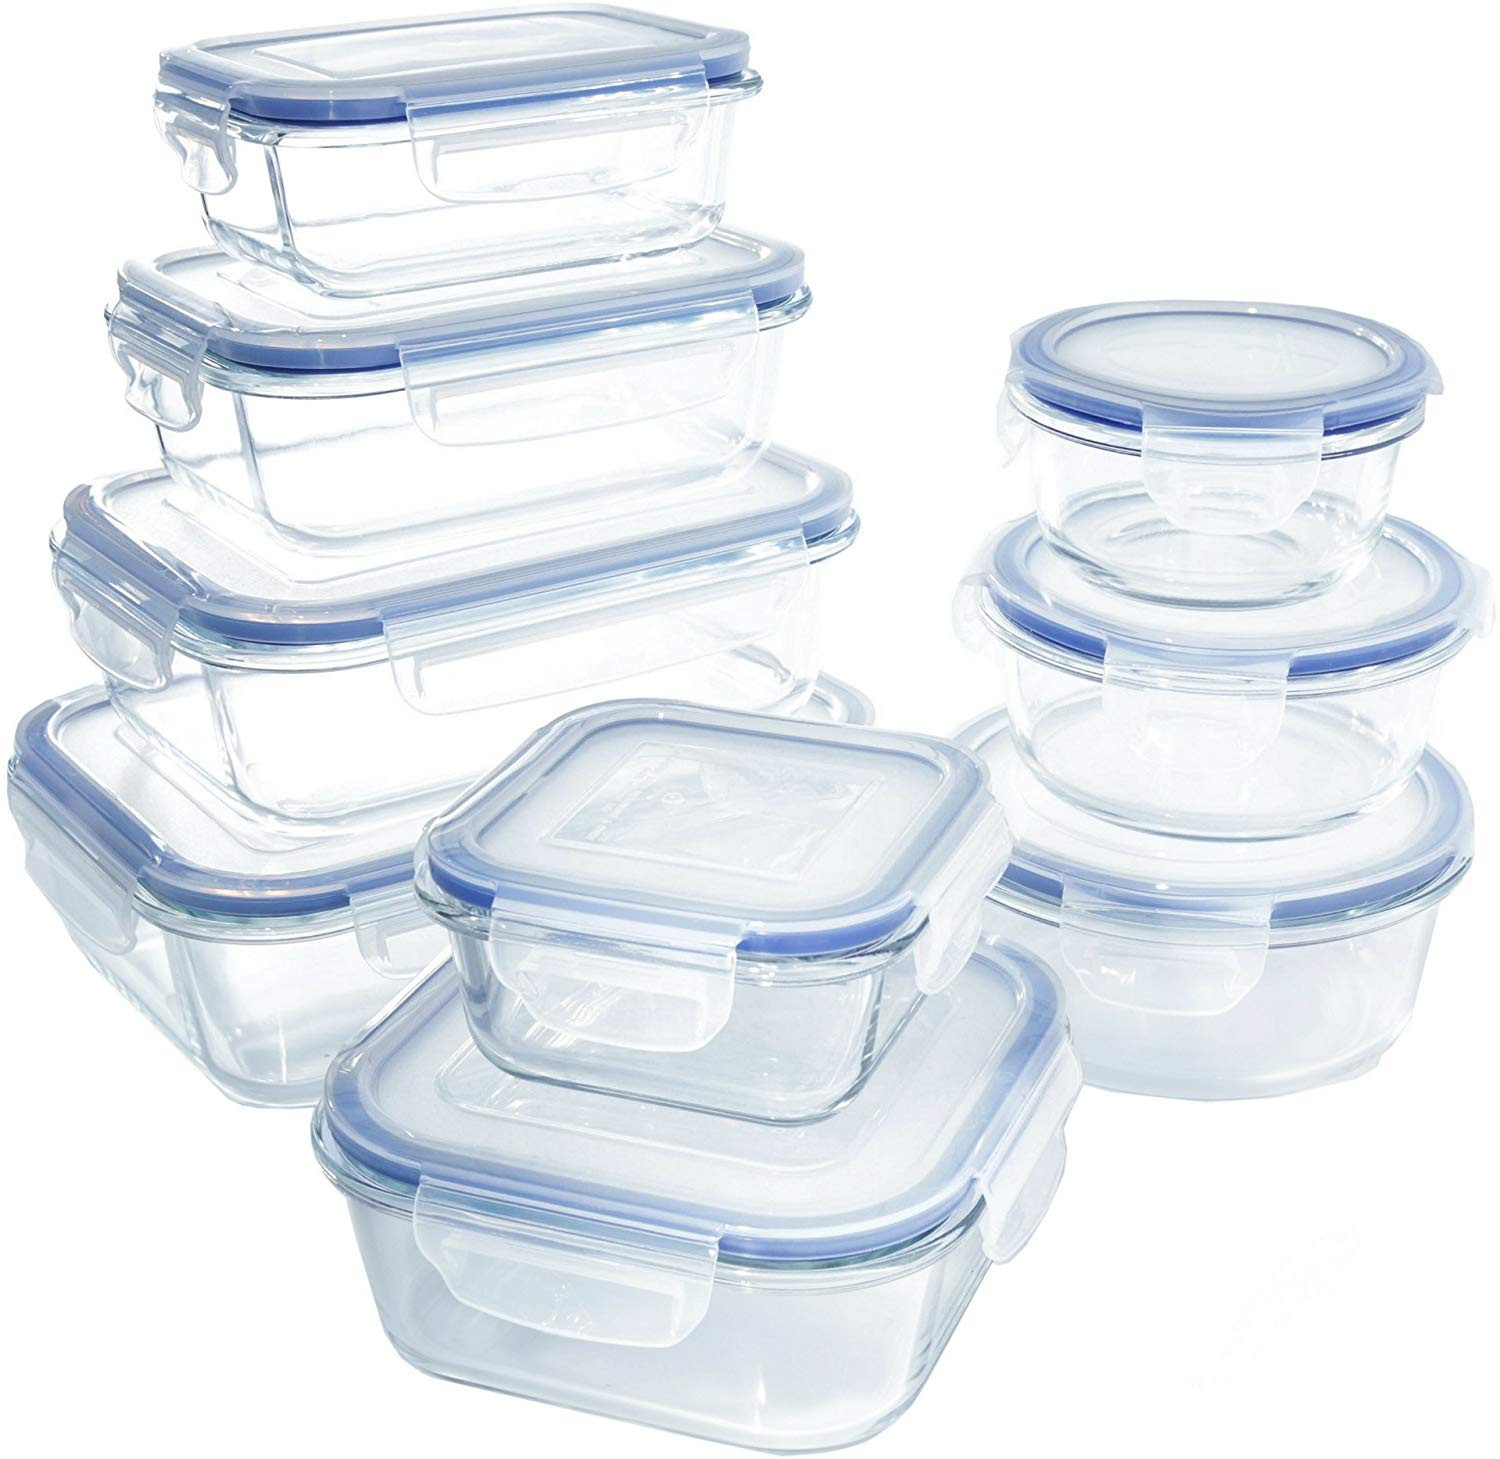 Kitchen Storage Containers Glass
 1790 Glass Food Storage Container Set with Lids 18 pc